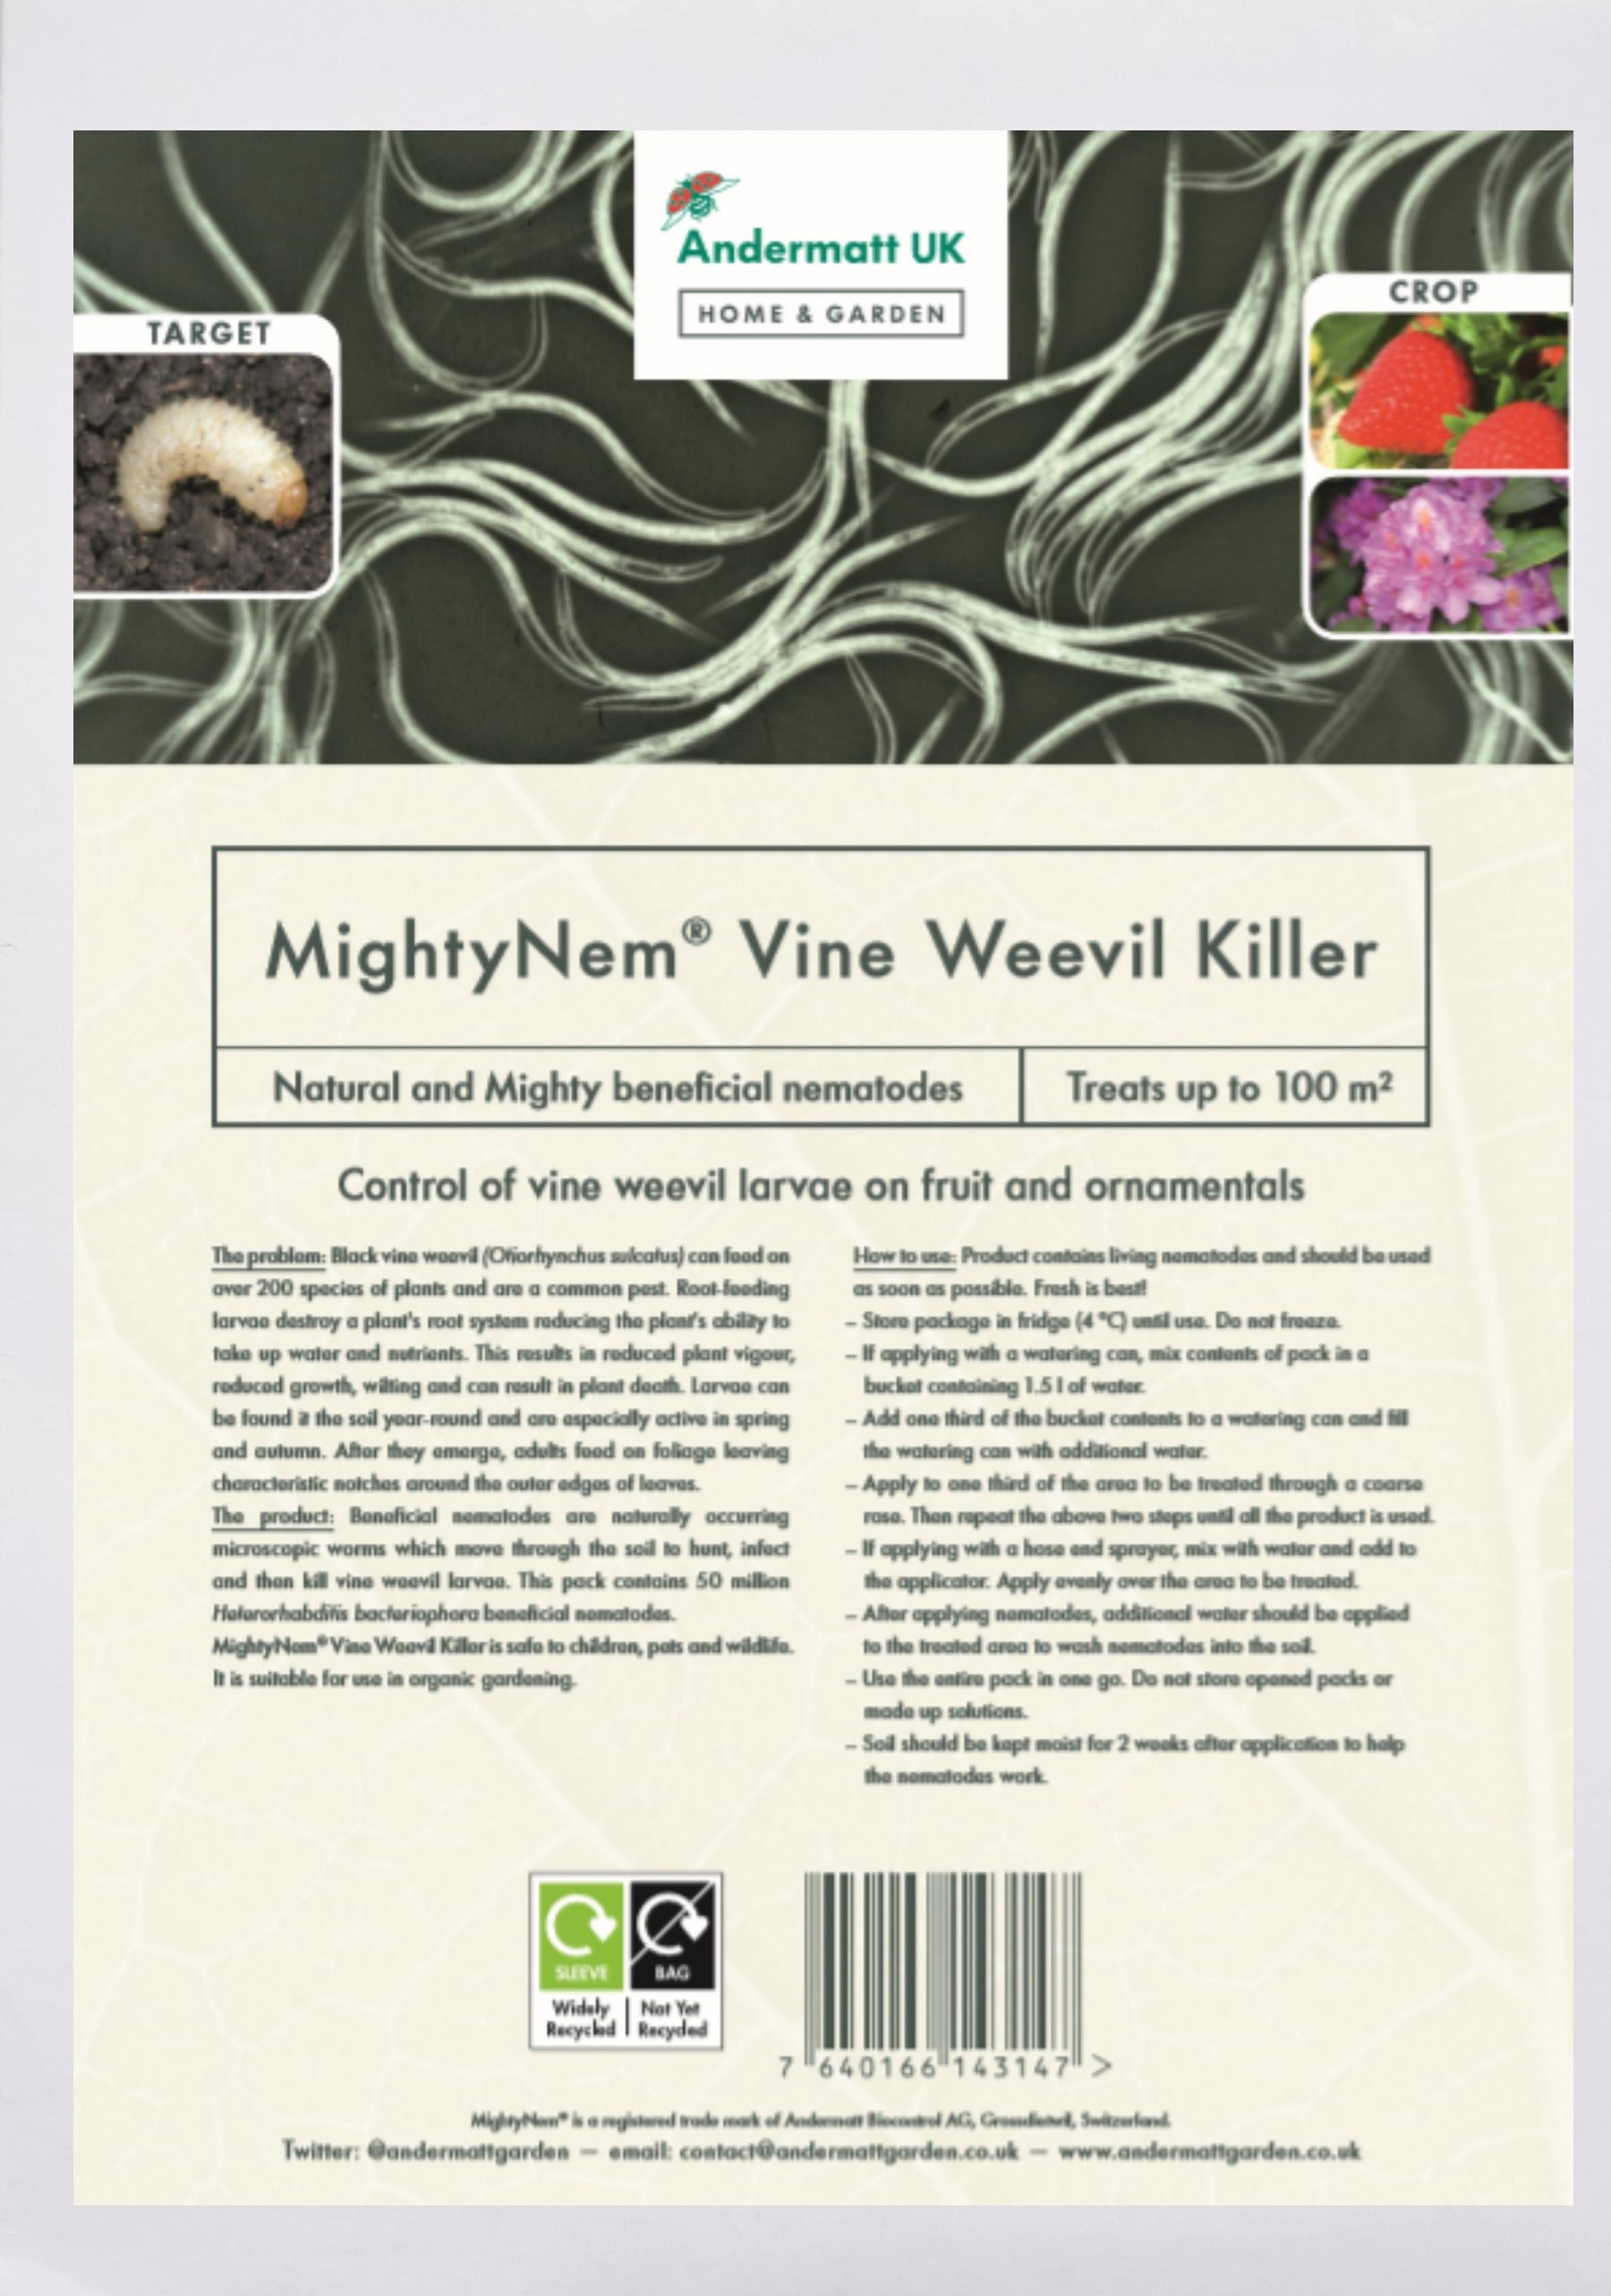 Photo of a MightyNem Vine Weevil Killer Package.